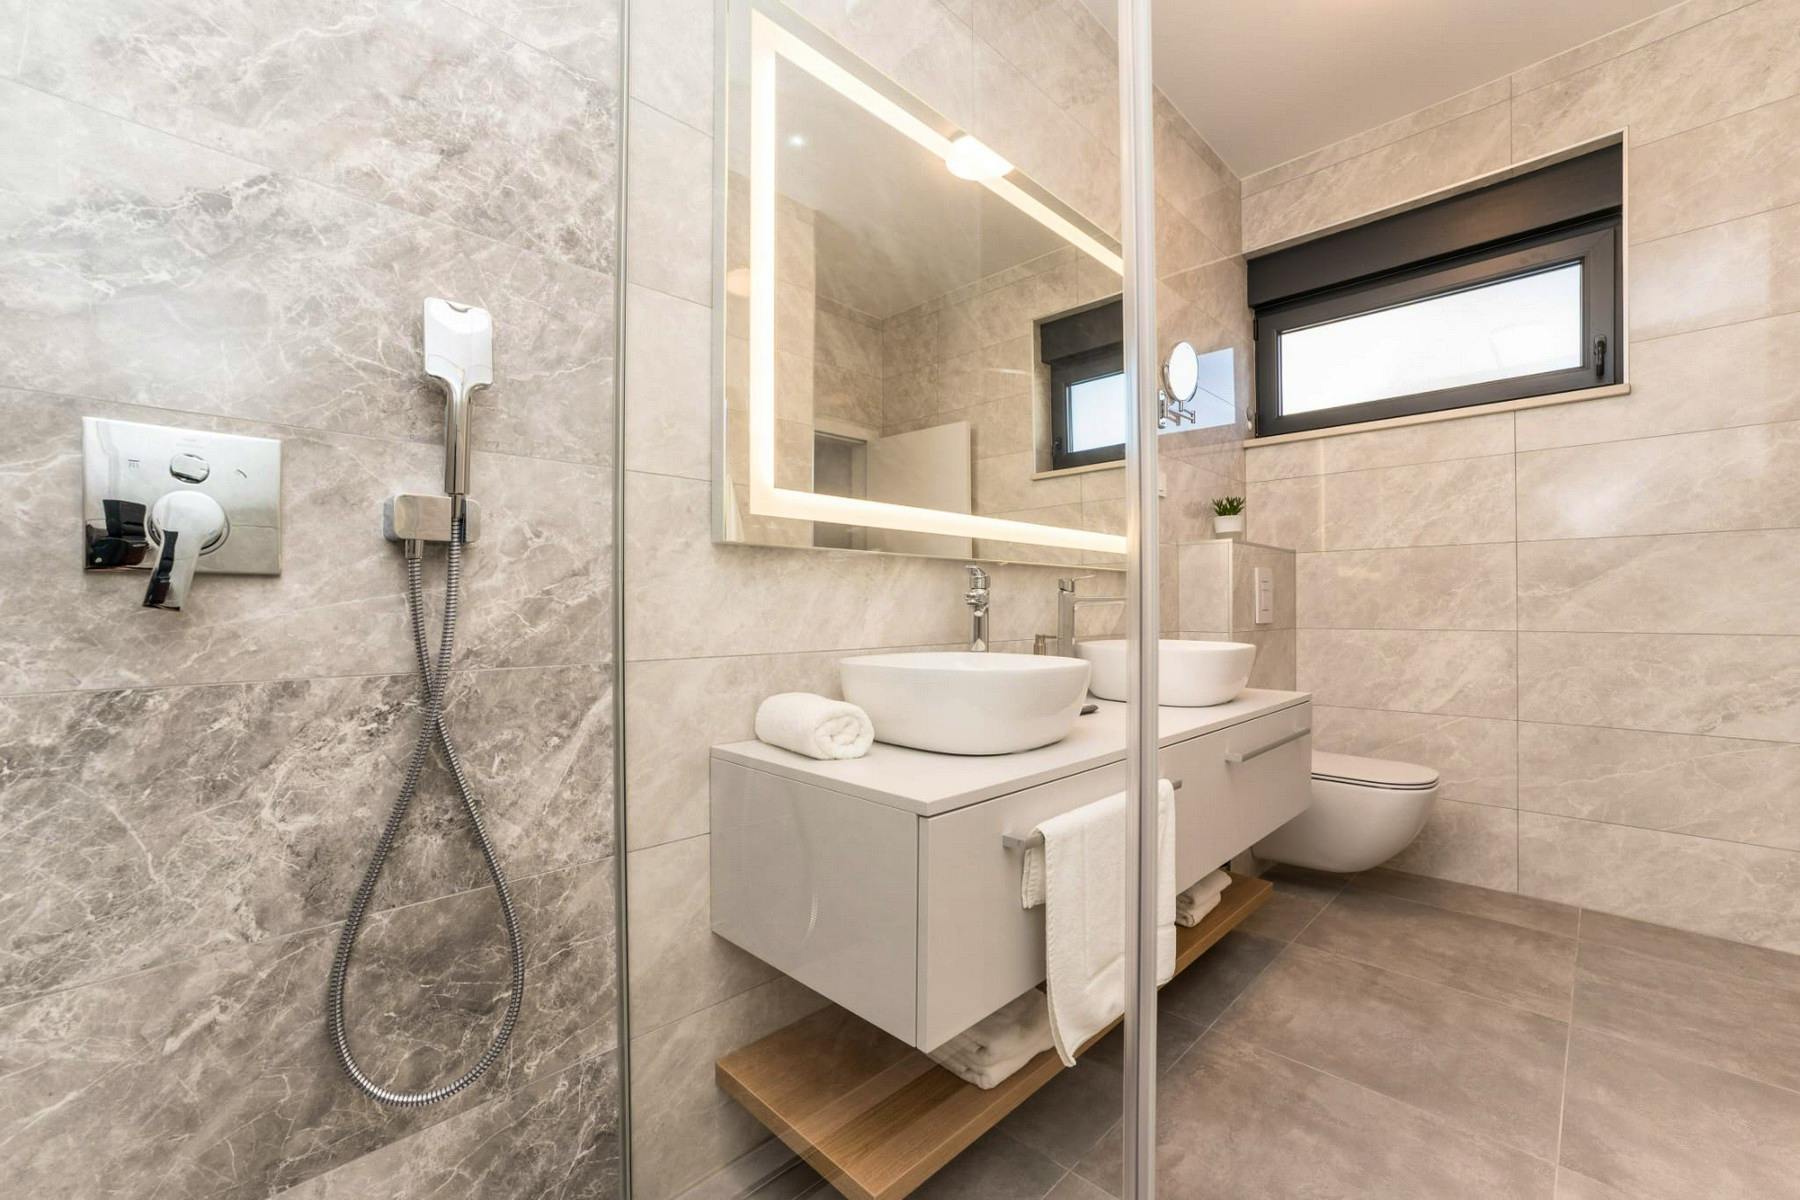 Spacious bathroom with walk-in shower